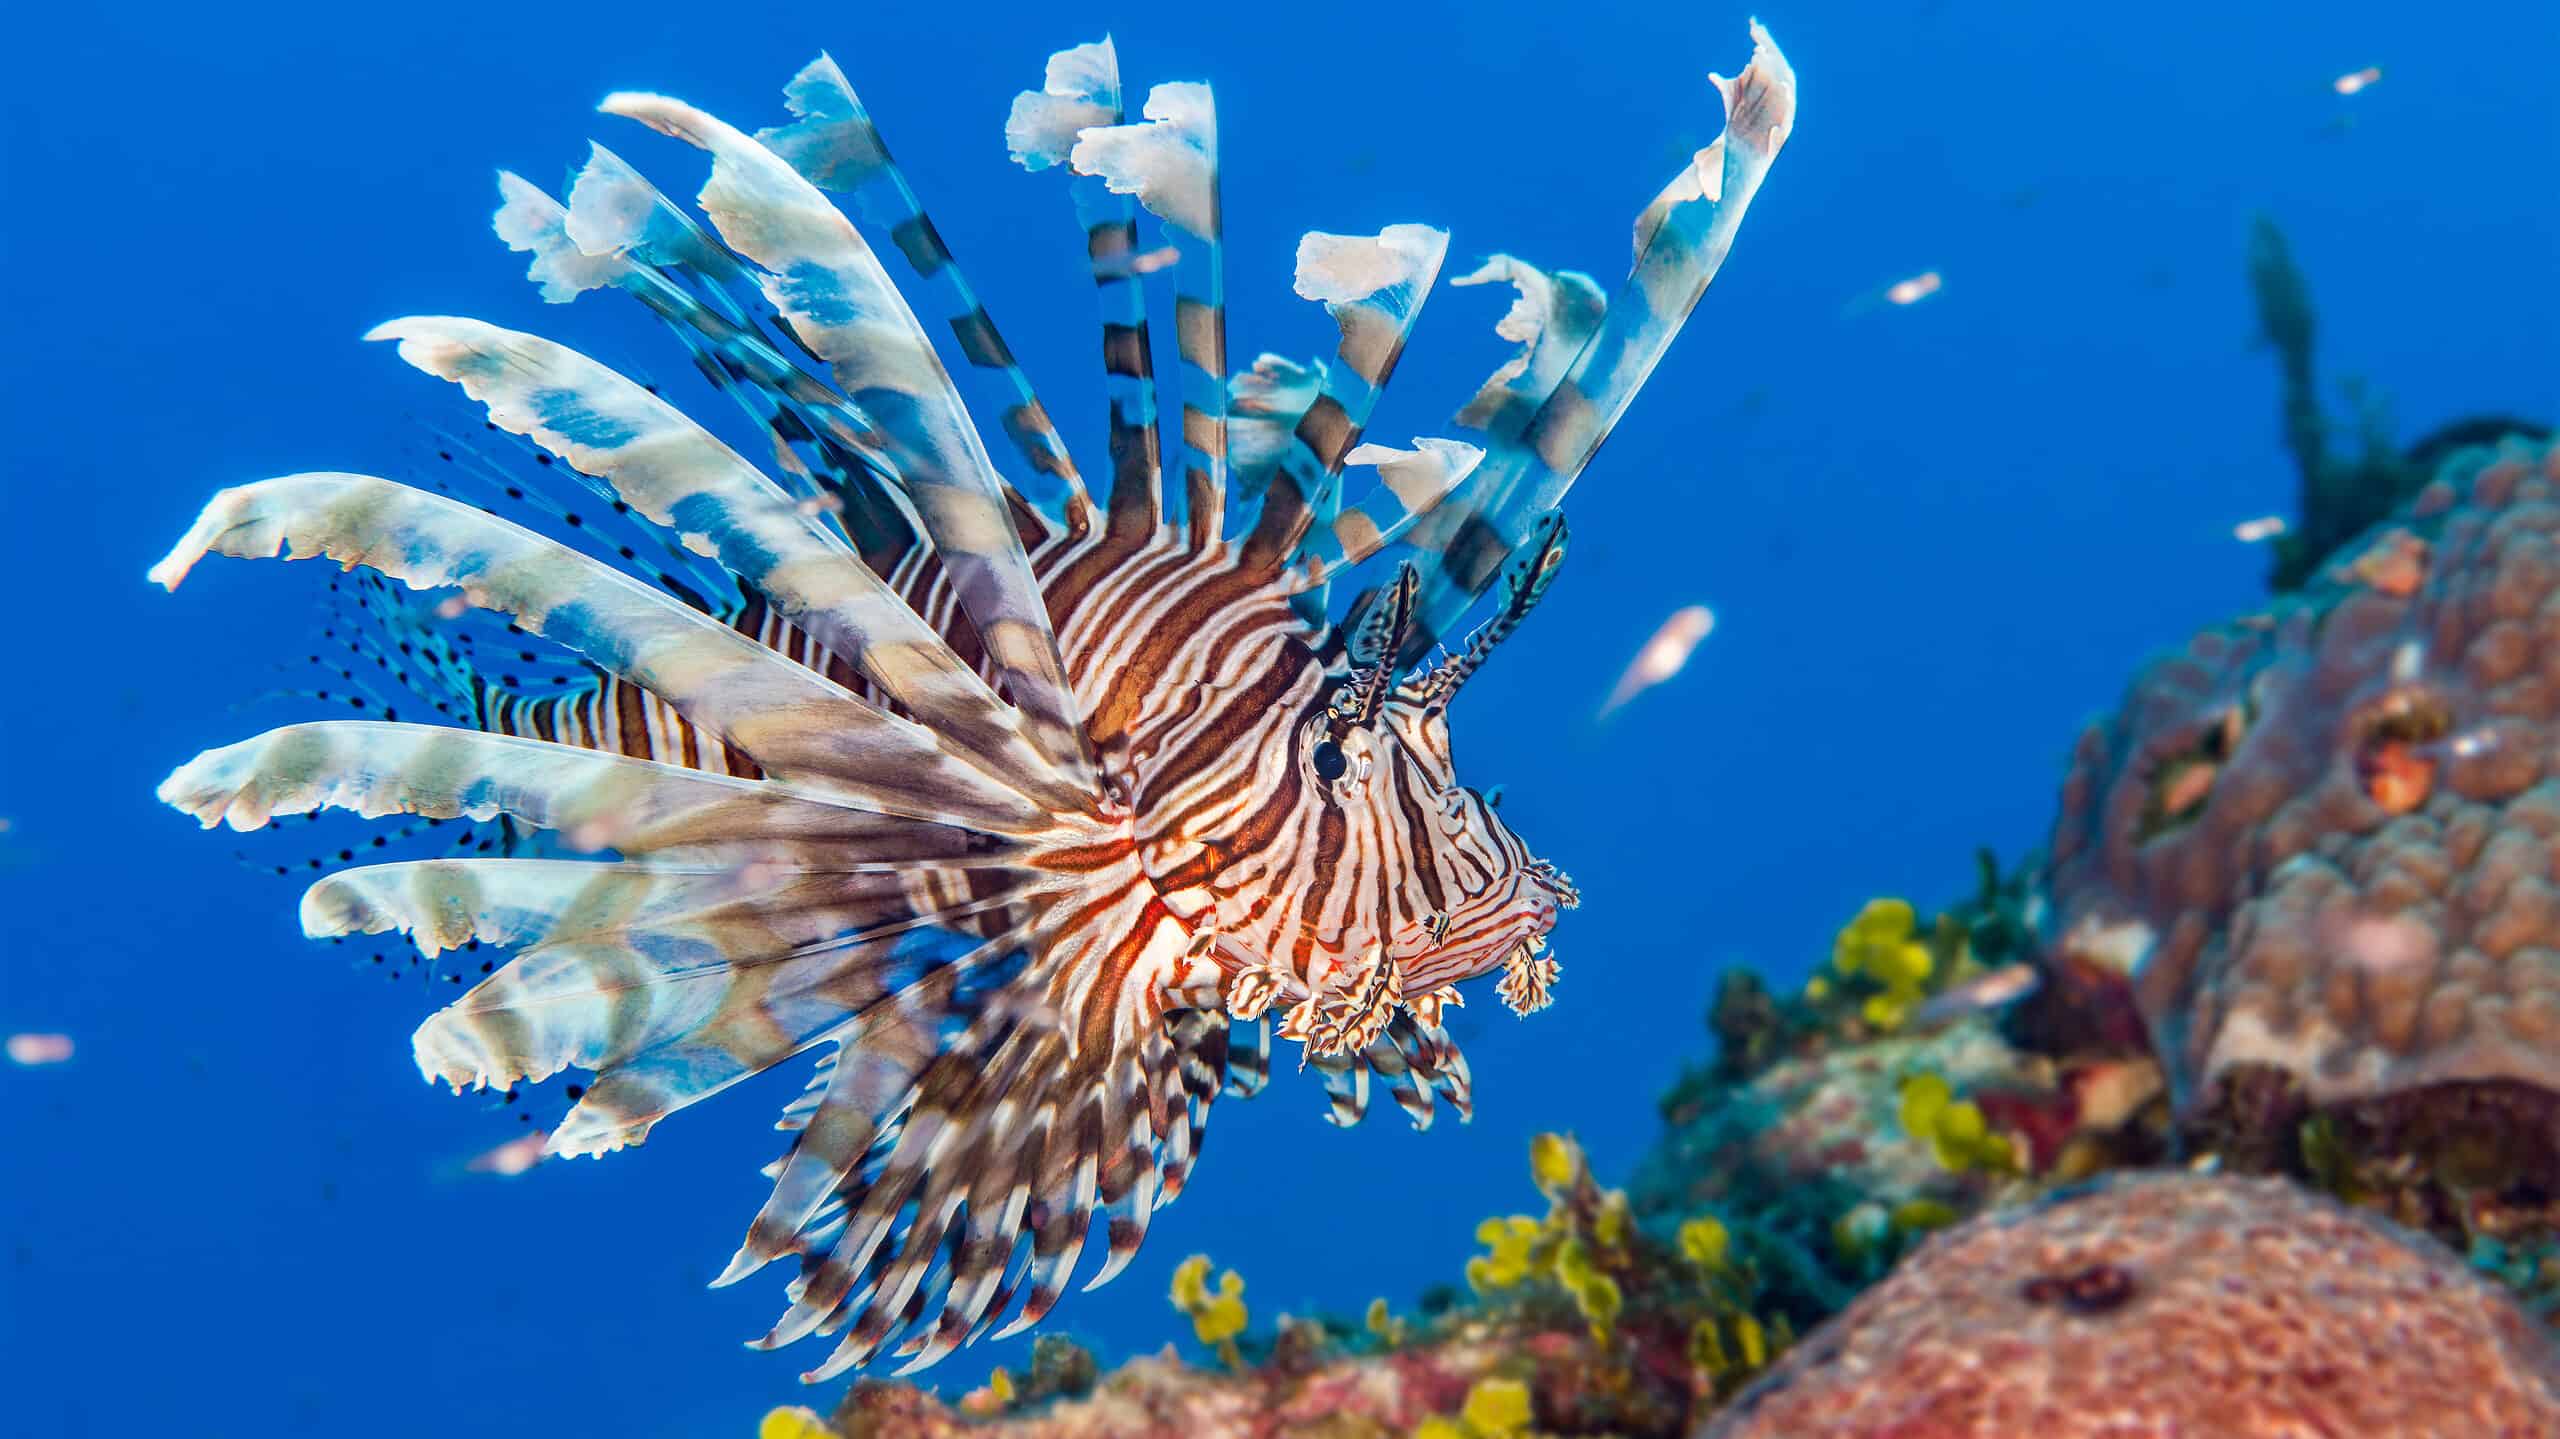 Discover 7 Spectacular Fish Found in the Bahamas